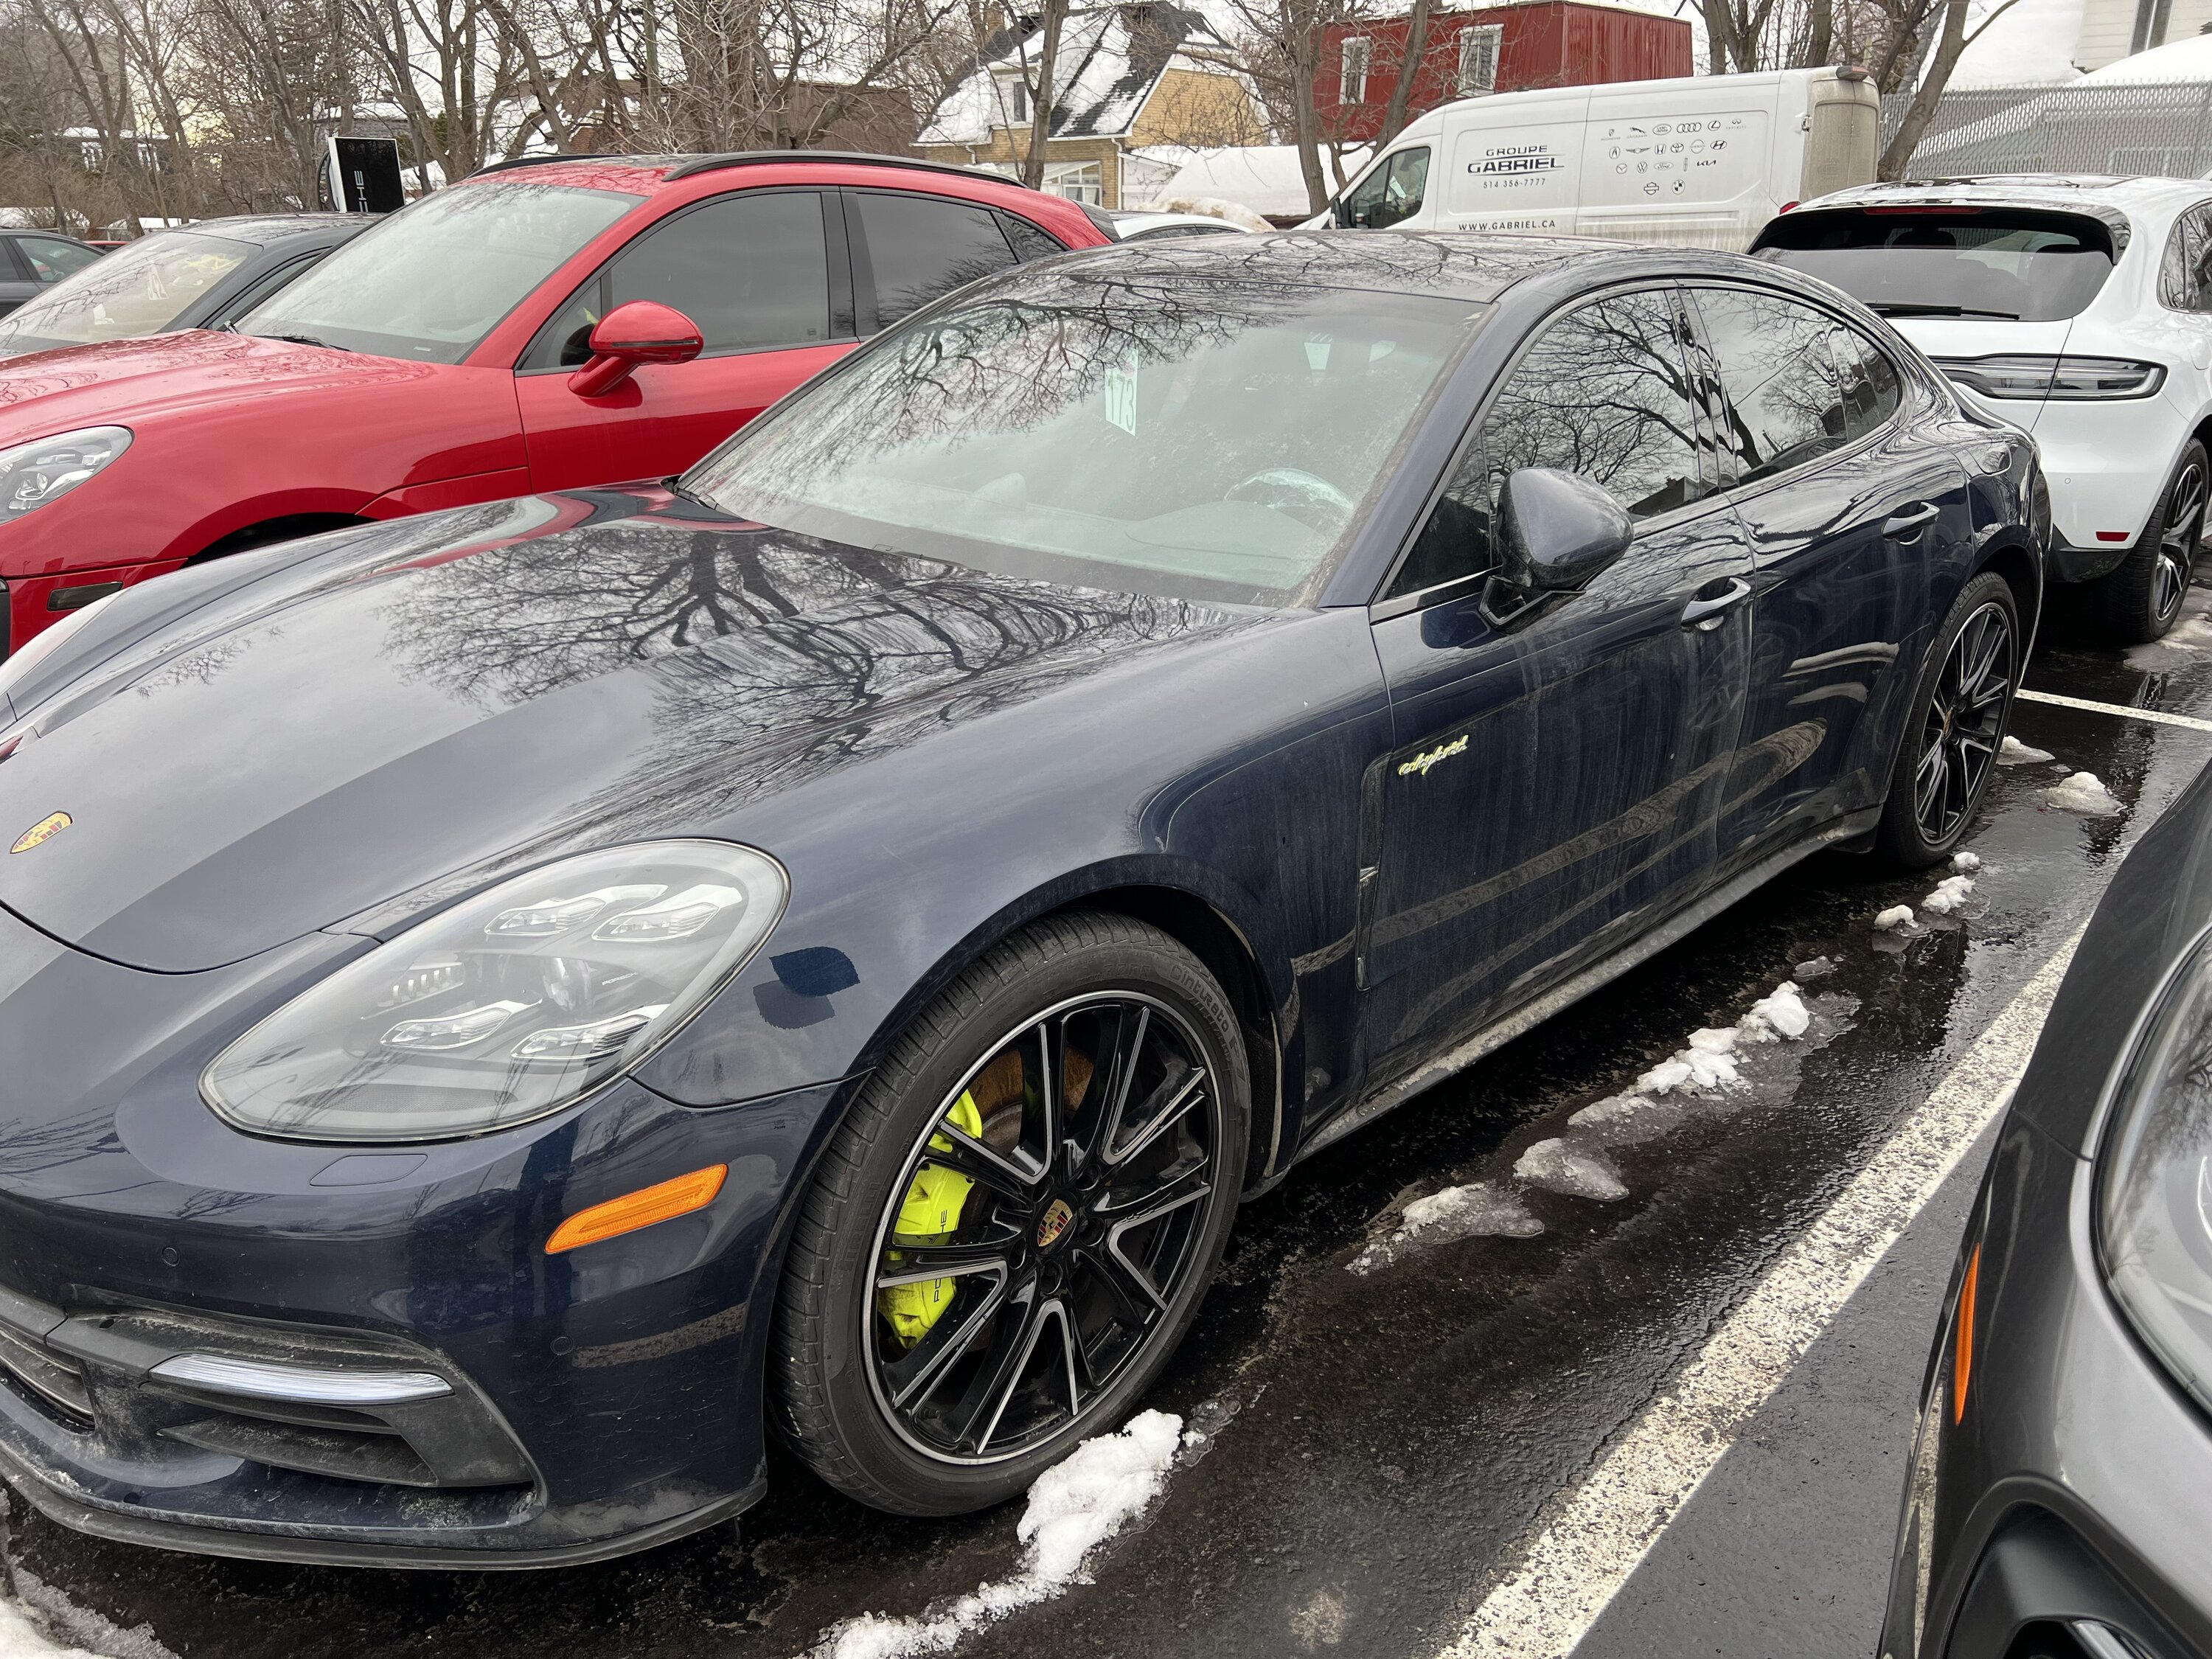 Goodbye to the Panamera eHybrid…thankfully able to reuse winter wheels (spacers to clear suspension knuckles)